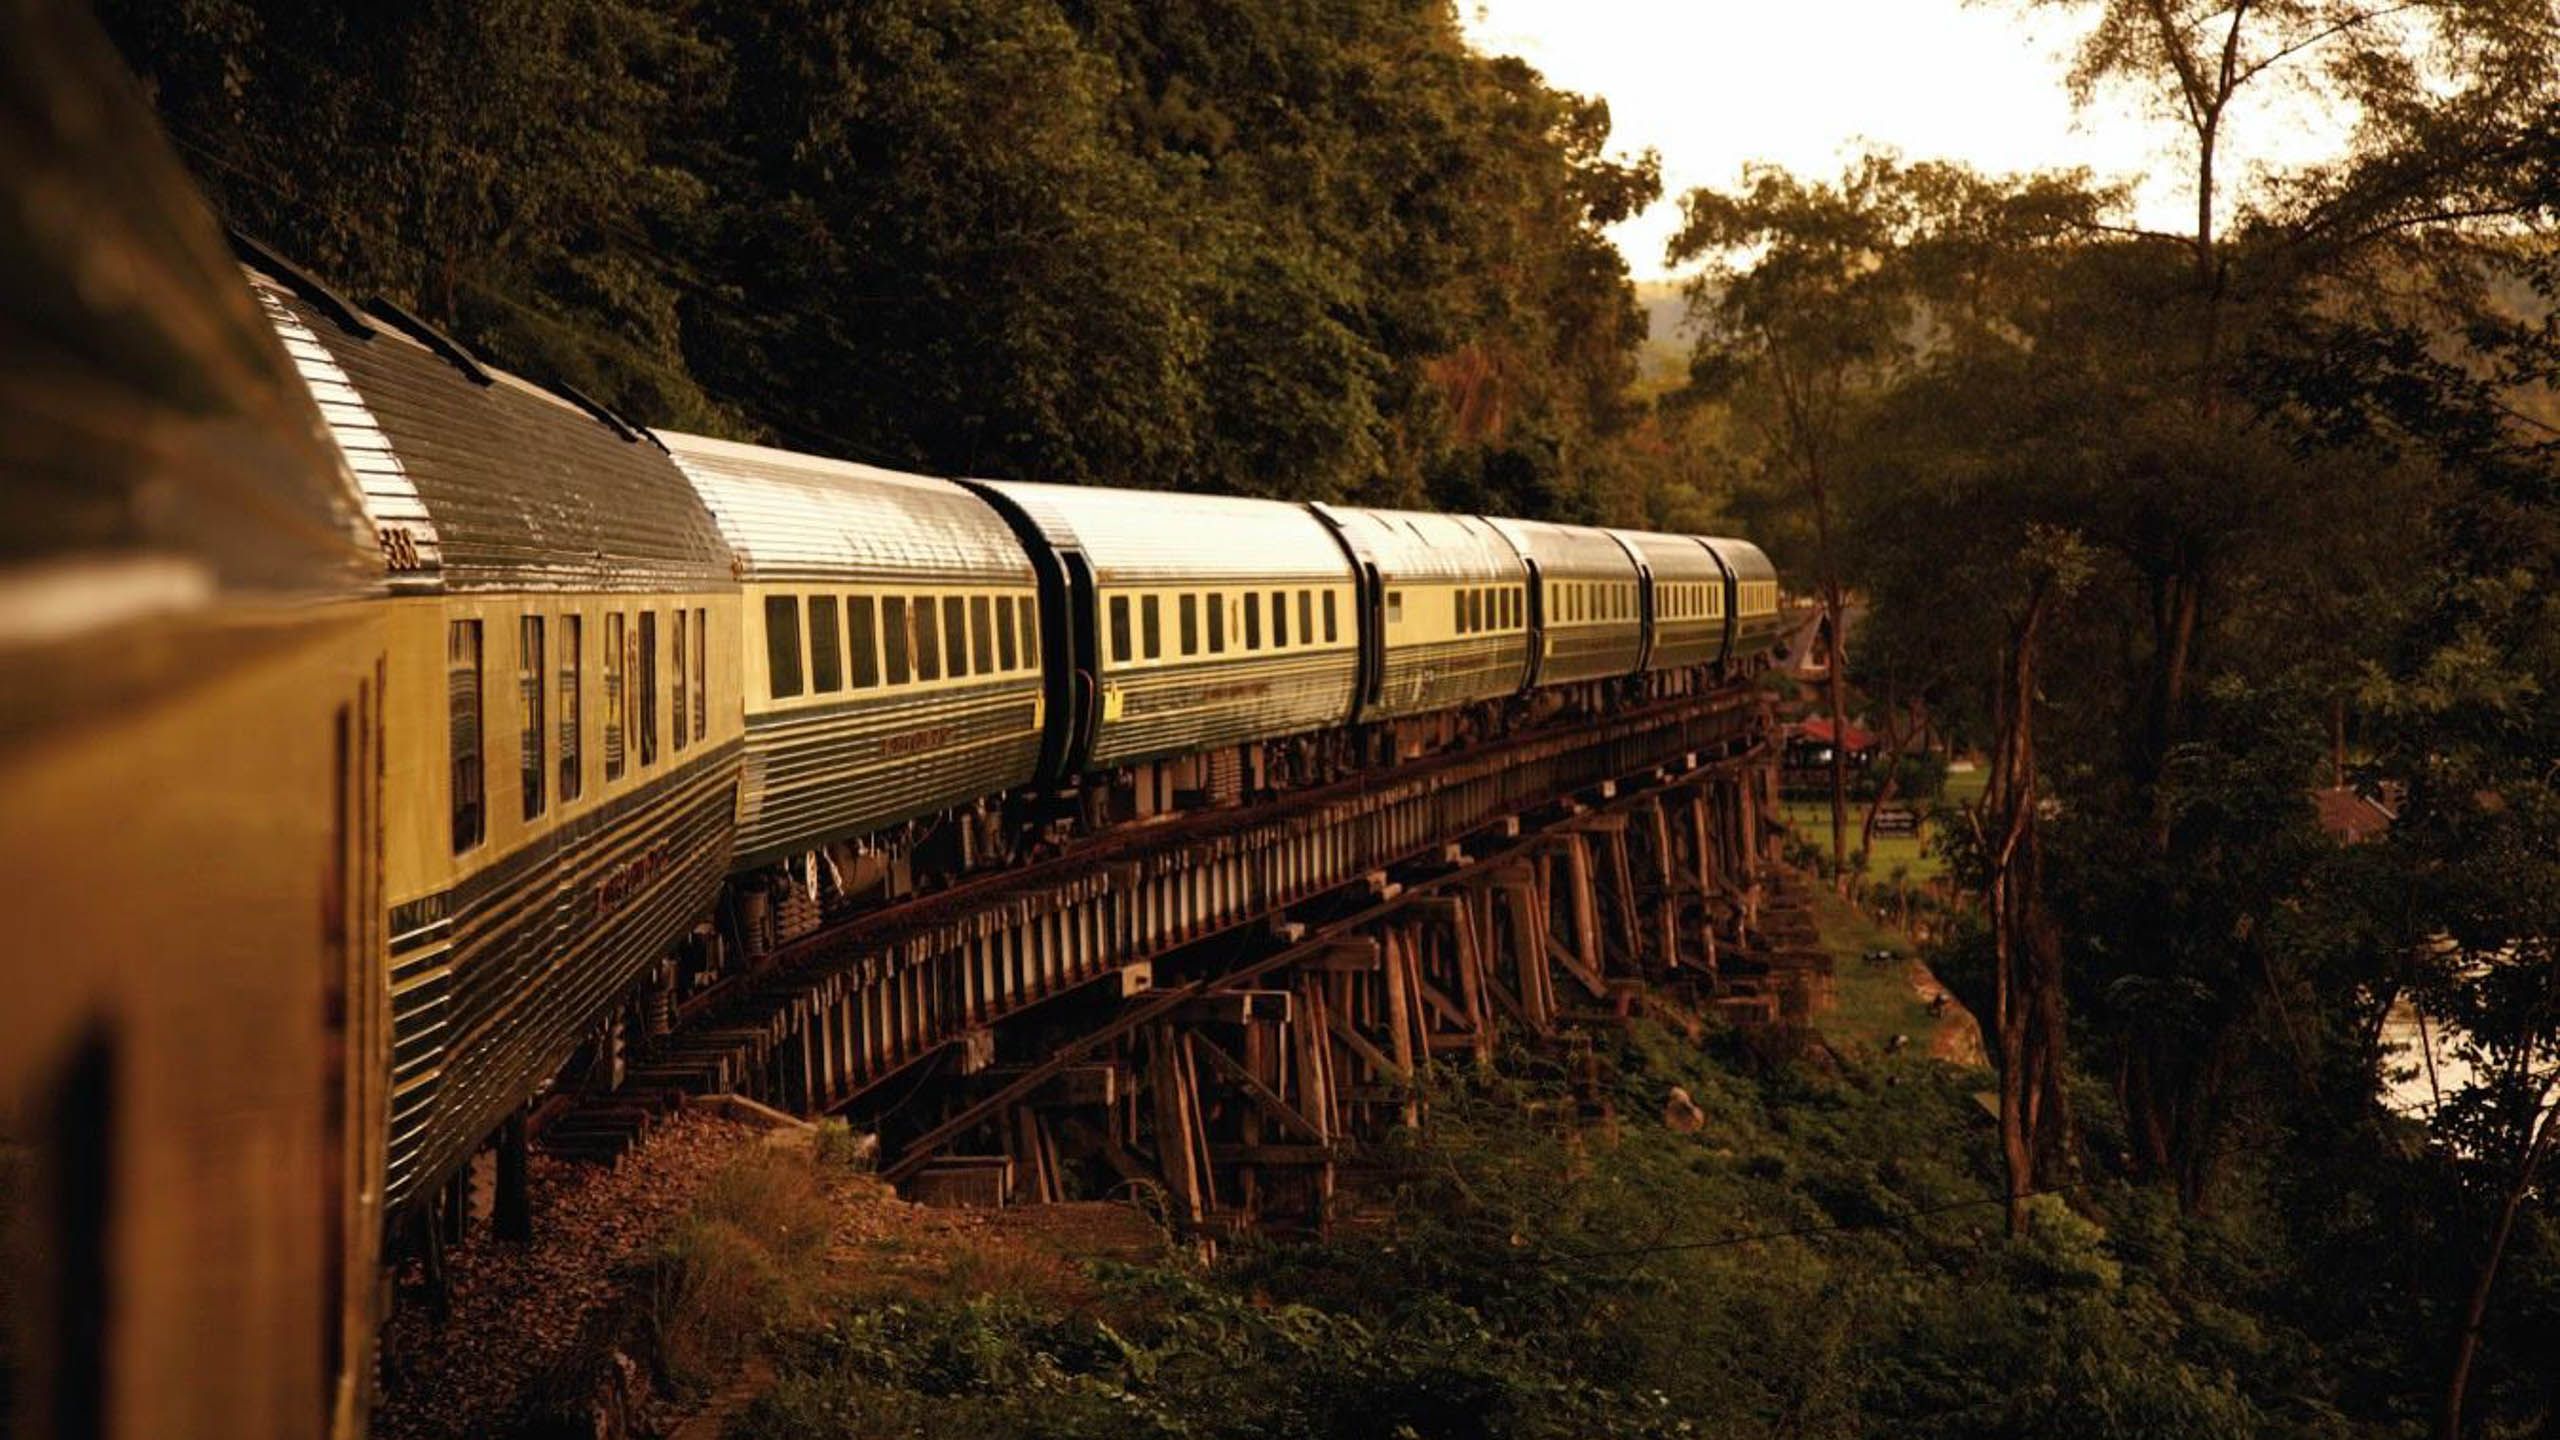 British Orient Express connection ended by Brexit - Hospitality